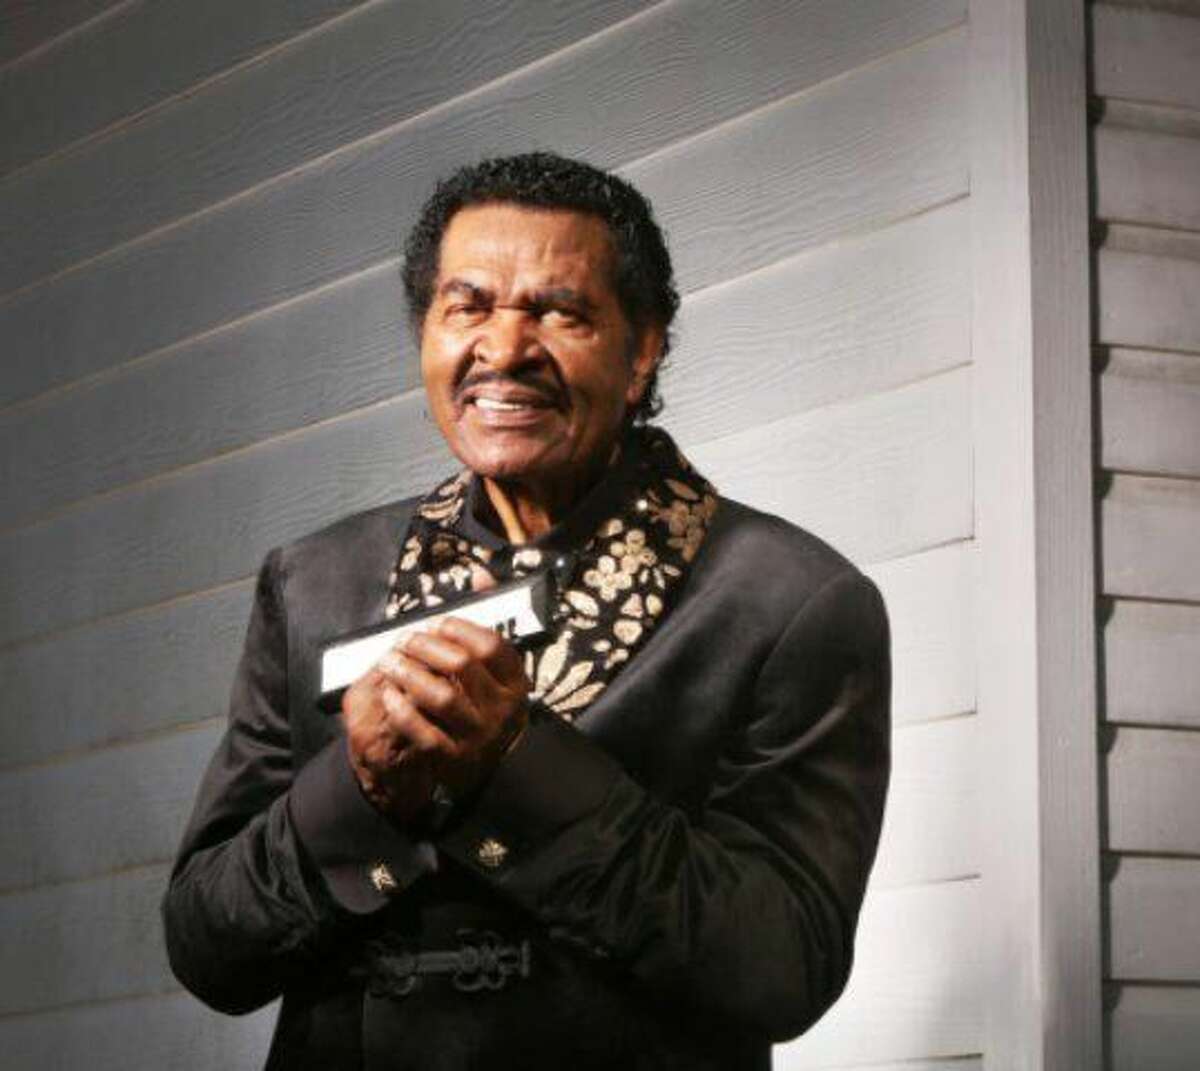 During its annual gala, the GRAMMY Museum Mississippi® honored Bobby Rush, a Blues Hall of Famer and GRAMMY® Award Winner with the Crossroads of American Music Award, created to honor artists who have made significant musical contributions influenced by the creativity born in the cradle of American music.